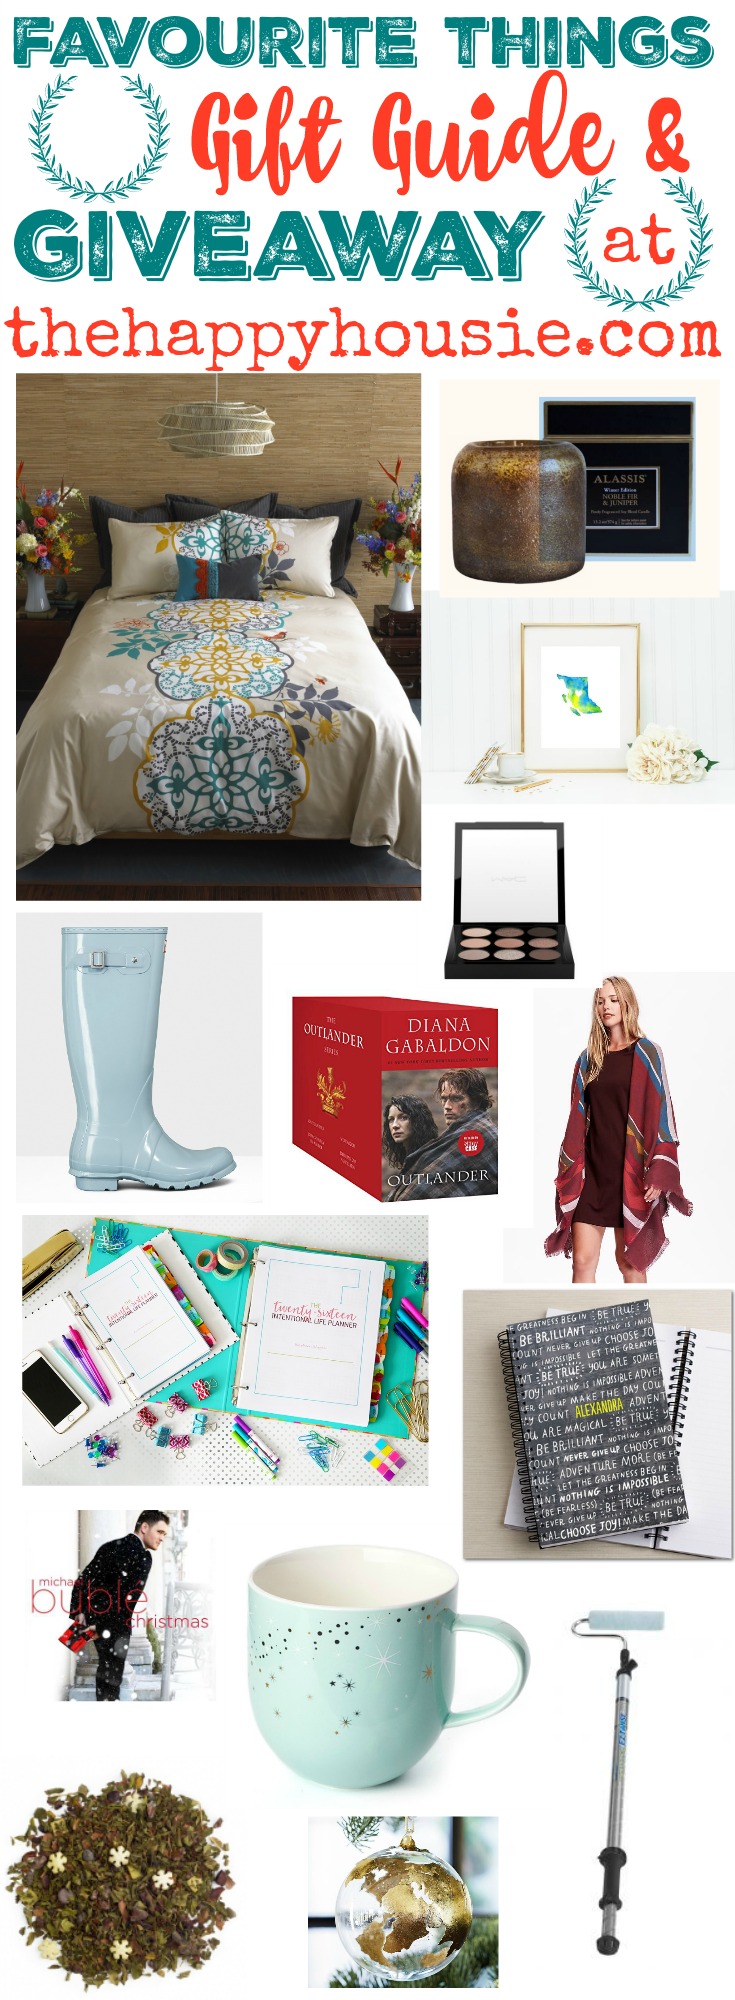 My Favourite Things Gift Guide & Giveaway at thehappyhousie.com